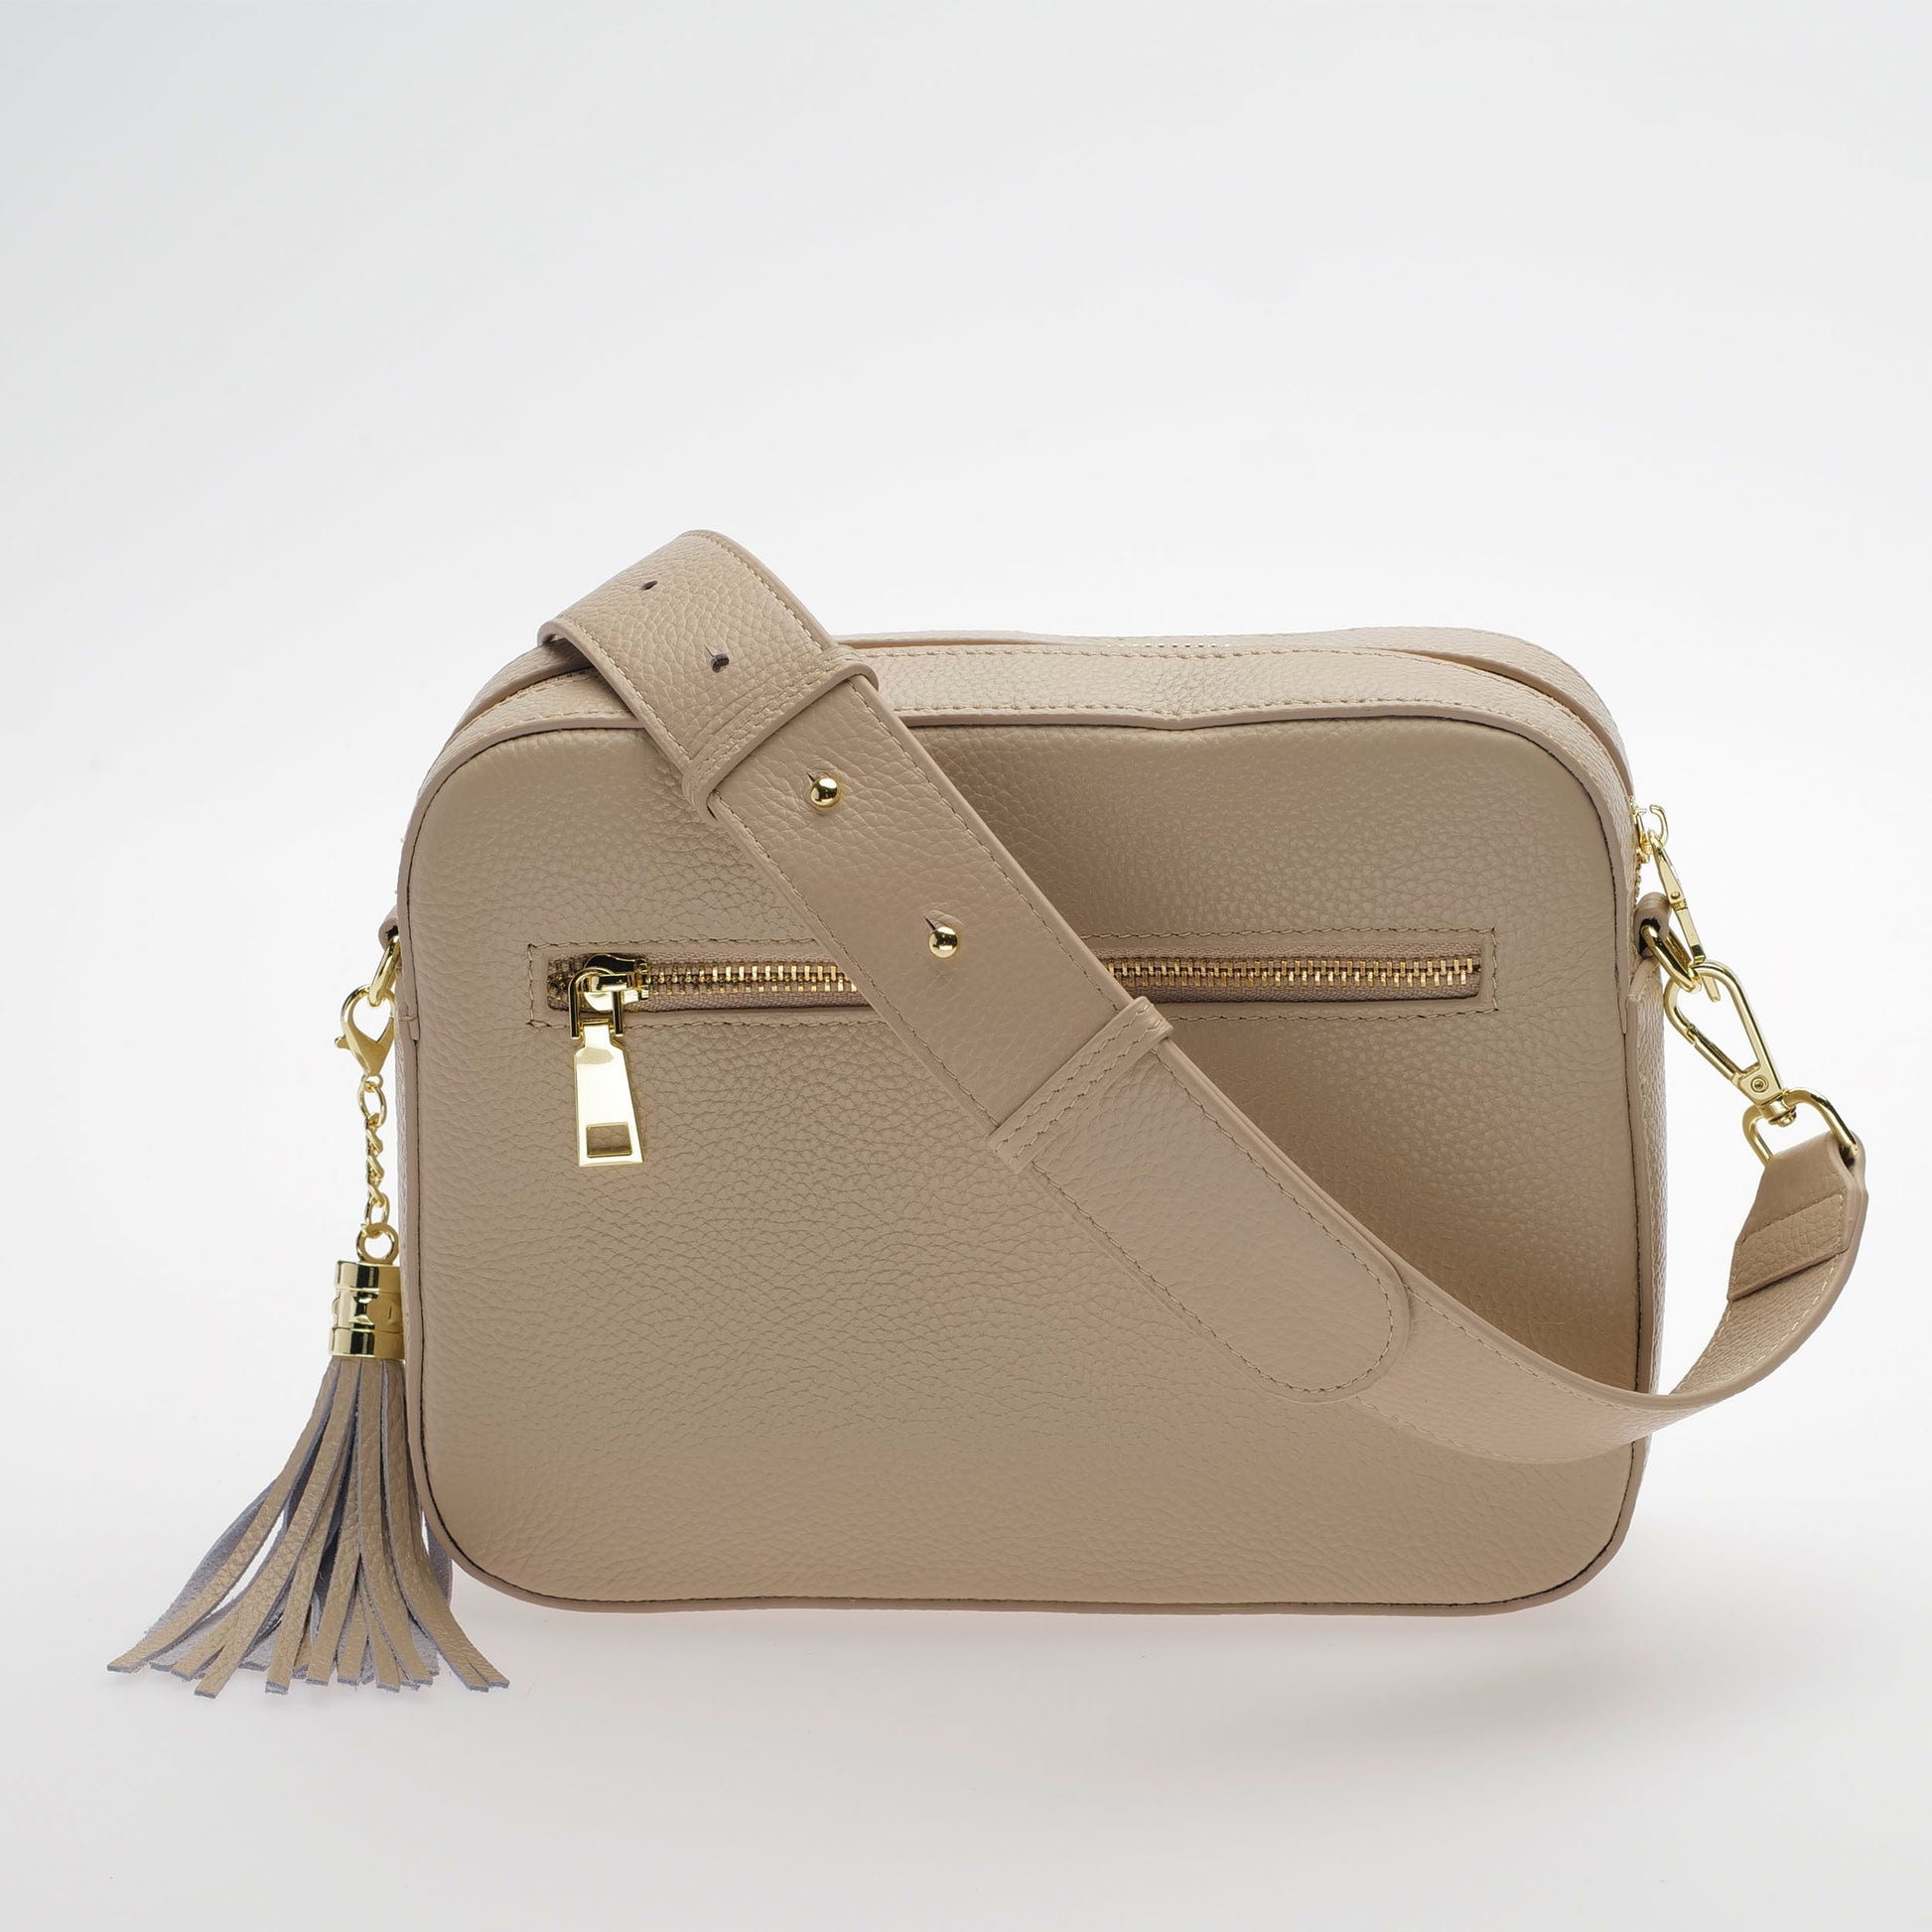 Stratford Crossbody Bag - Calma Stone with Matching Leather Strap